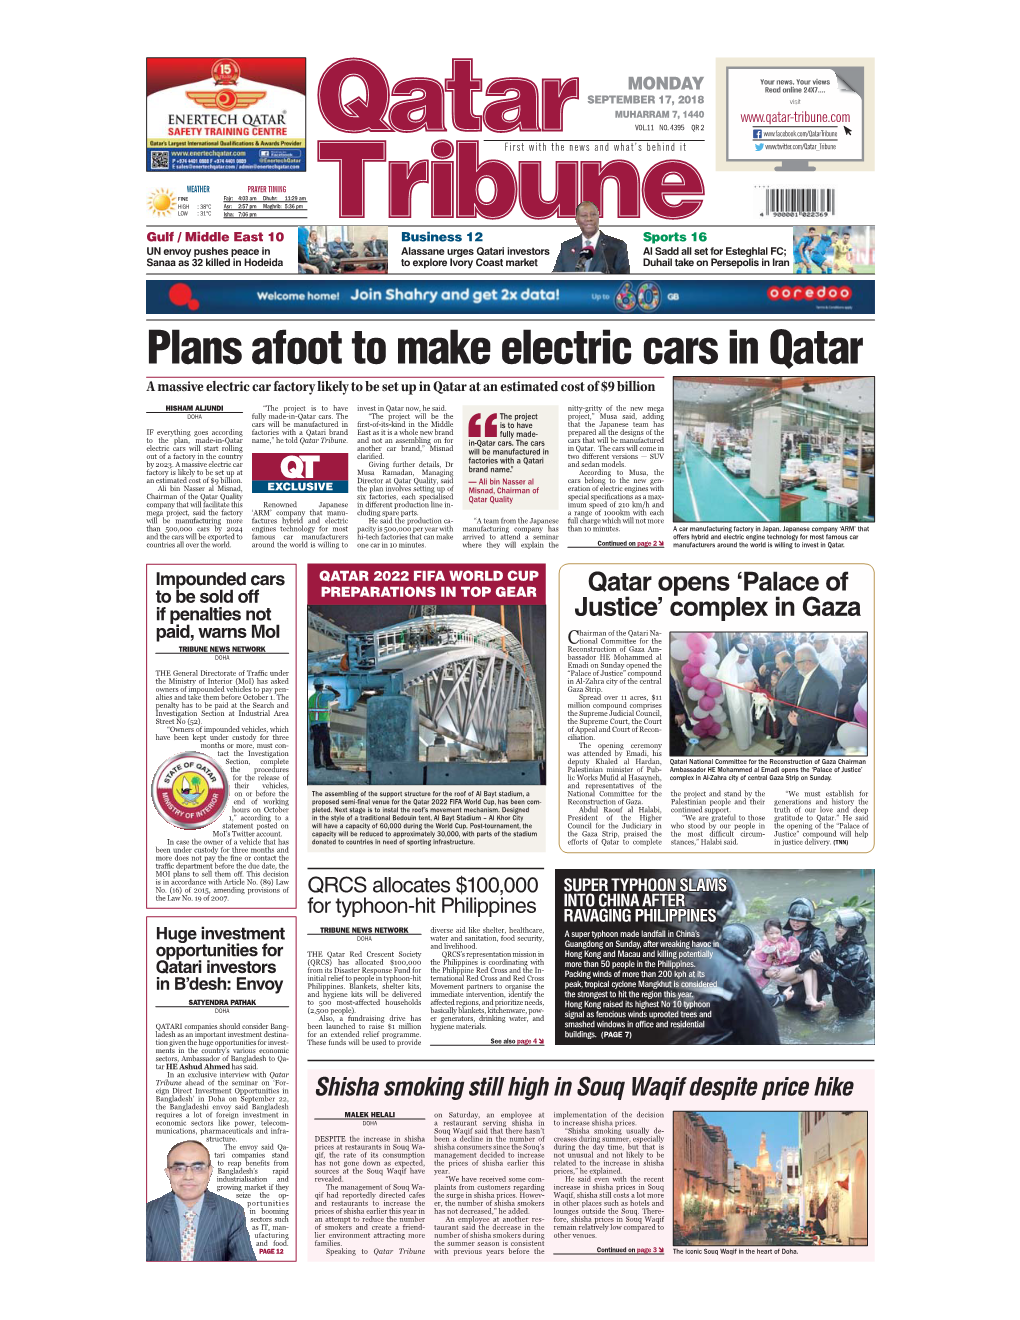 Plans Afoot to Make Electric Cars in Qatar a Massive Electric Car Factory Likely to Be Set up in Qatar at an Estimated Cost of $9 Billion